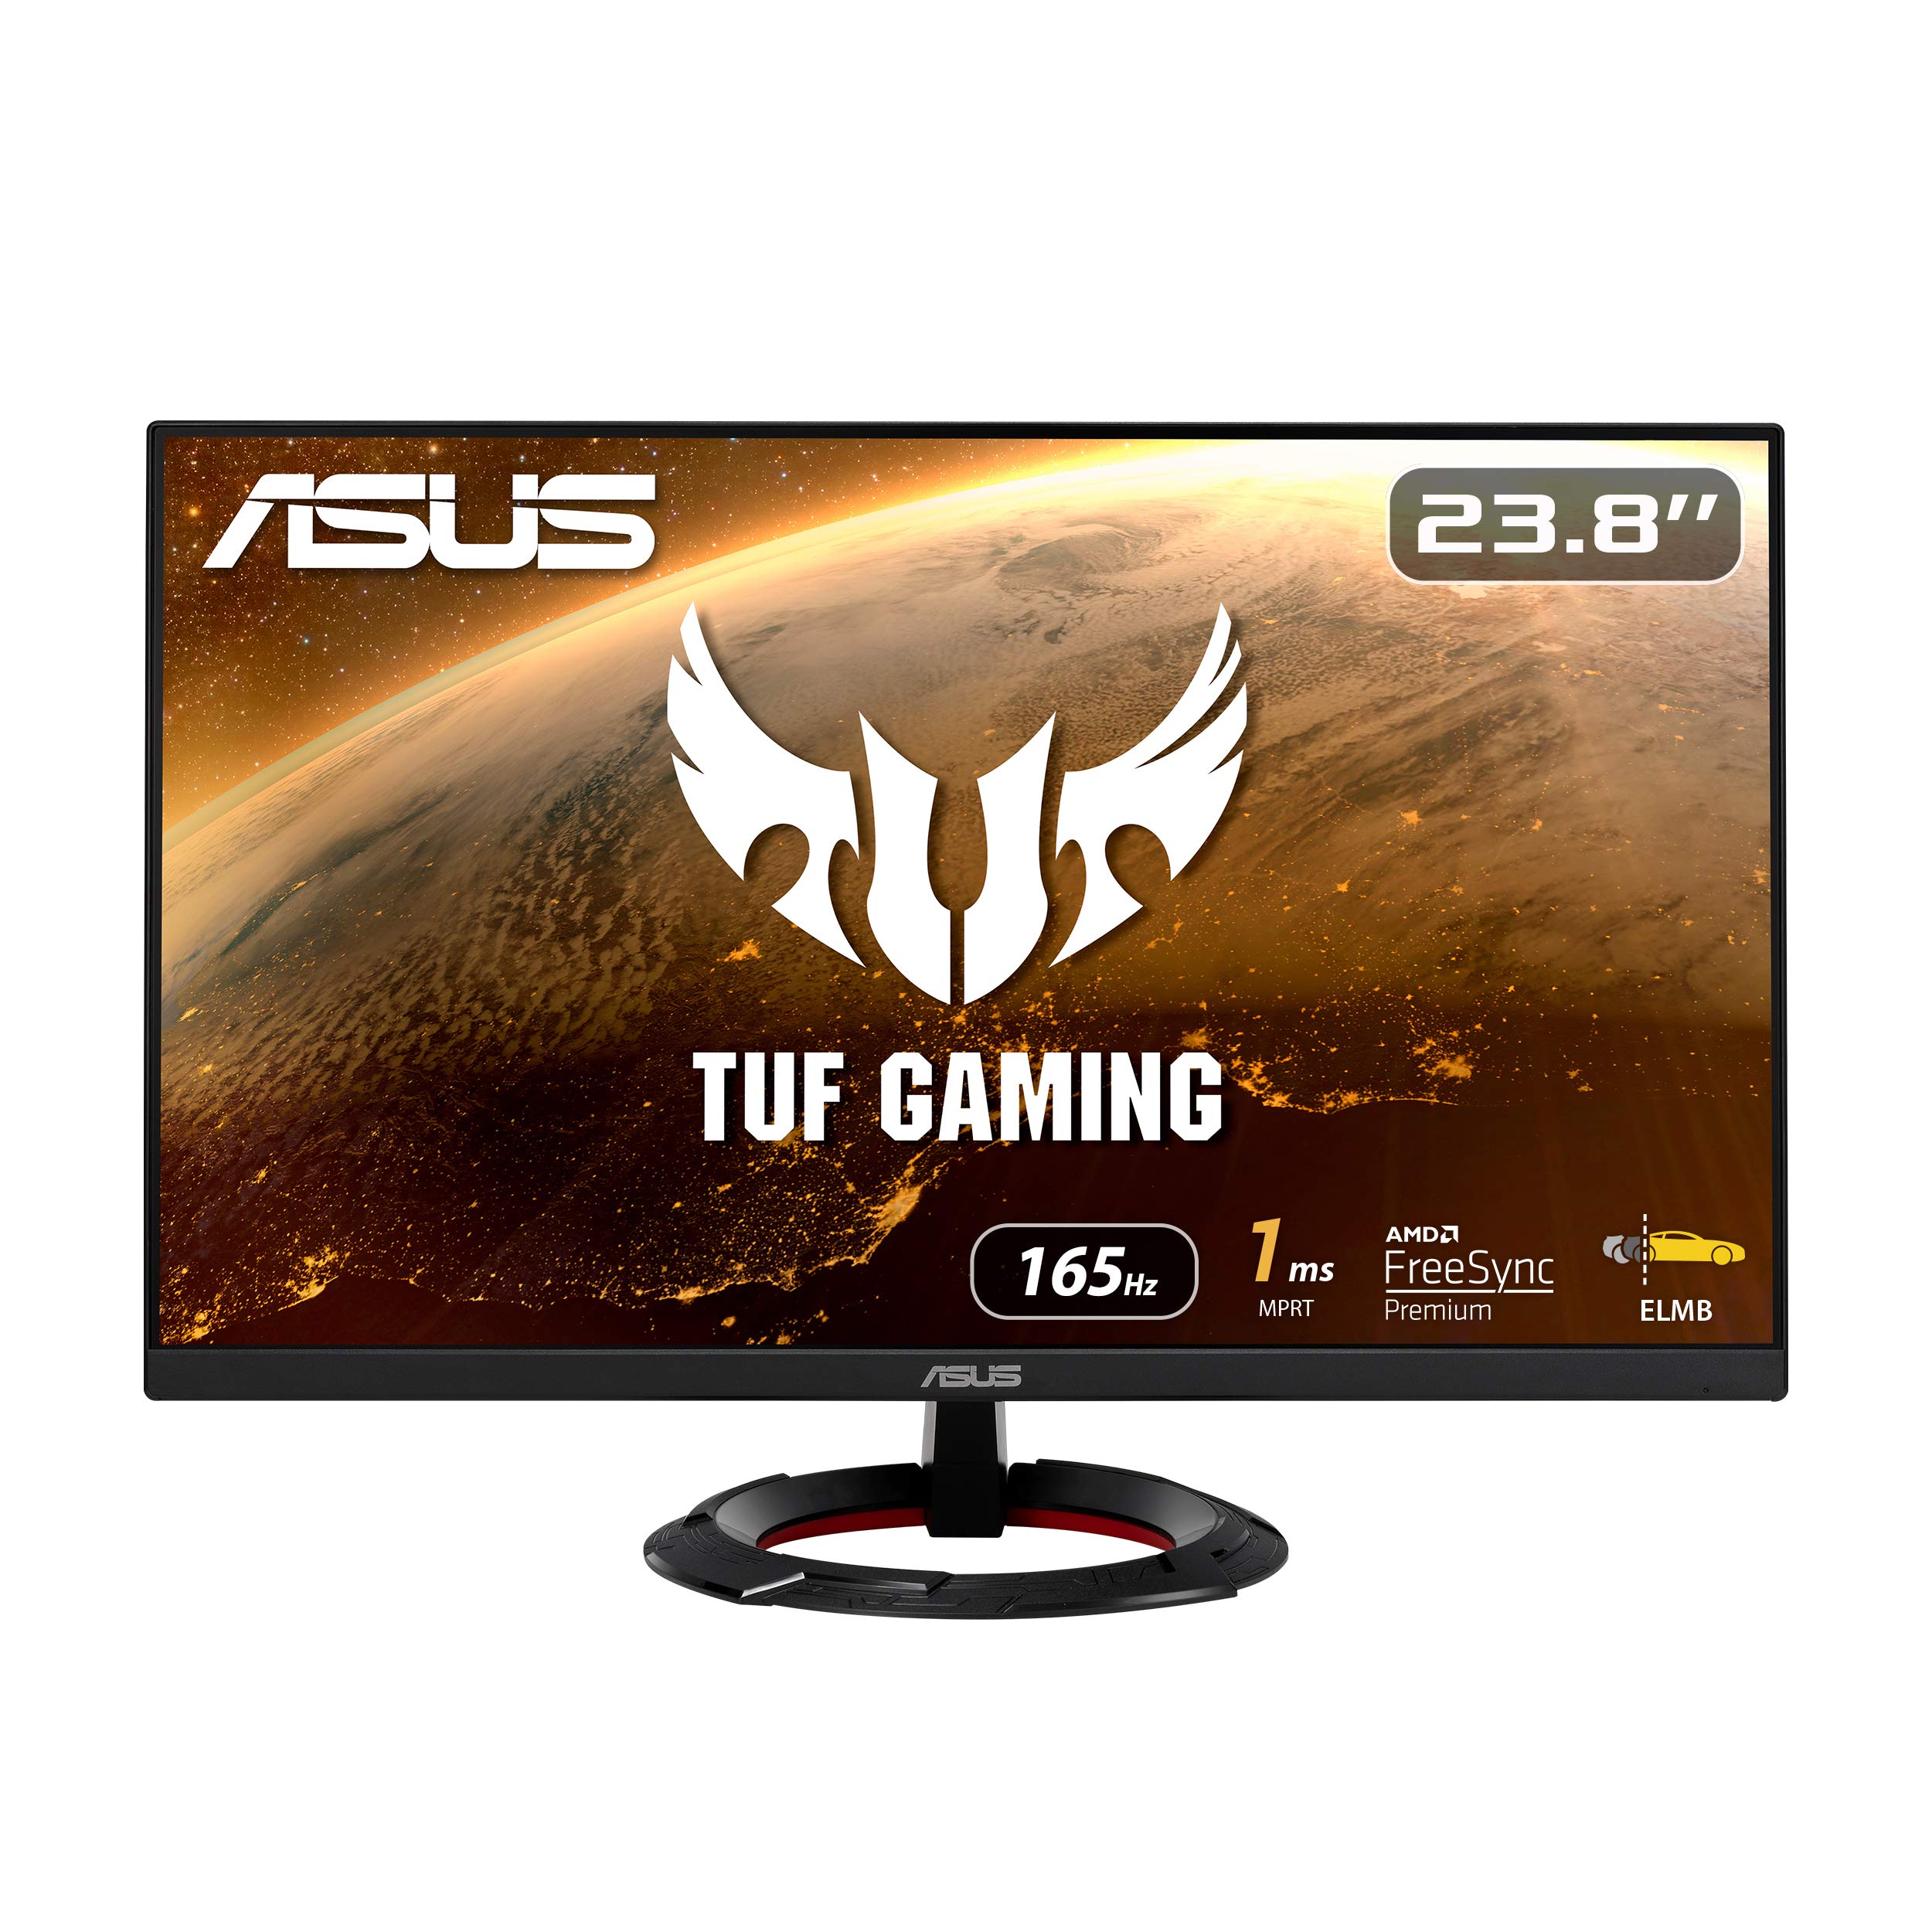 Asus 24.5" 1080P Gaming Monitor (VG258QR) - Full HD, 165Hz (Supports 144Hz), 0.5ms, Extreme Low Motion Blur, Speaker, Adaptive-Sync, G-SYNC Compatible, VESA Mountable, DisplayPort